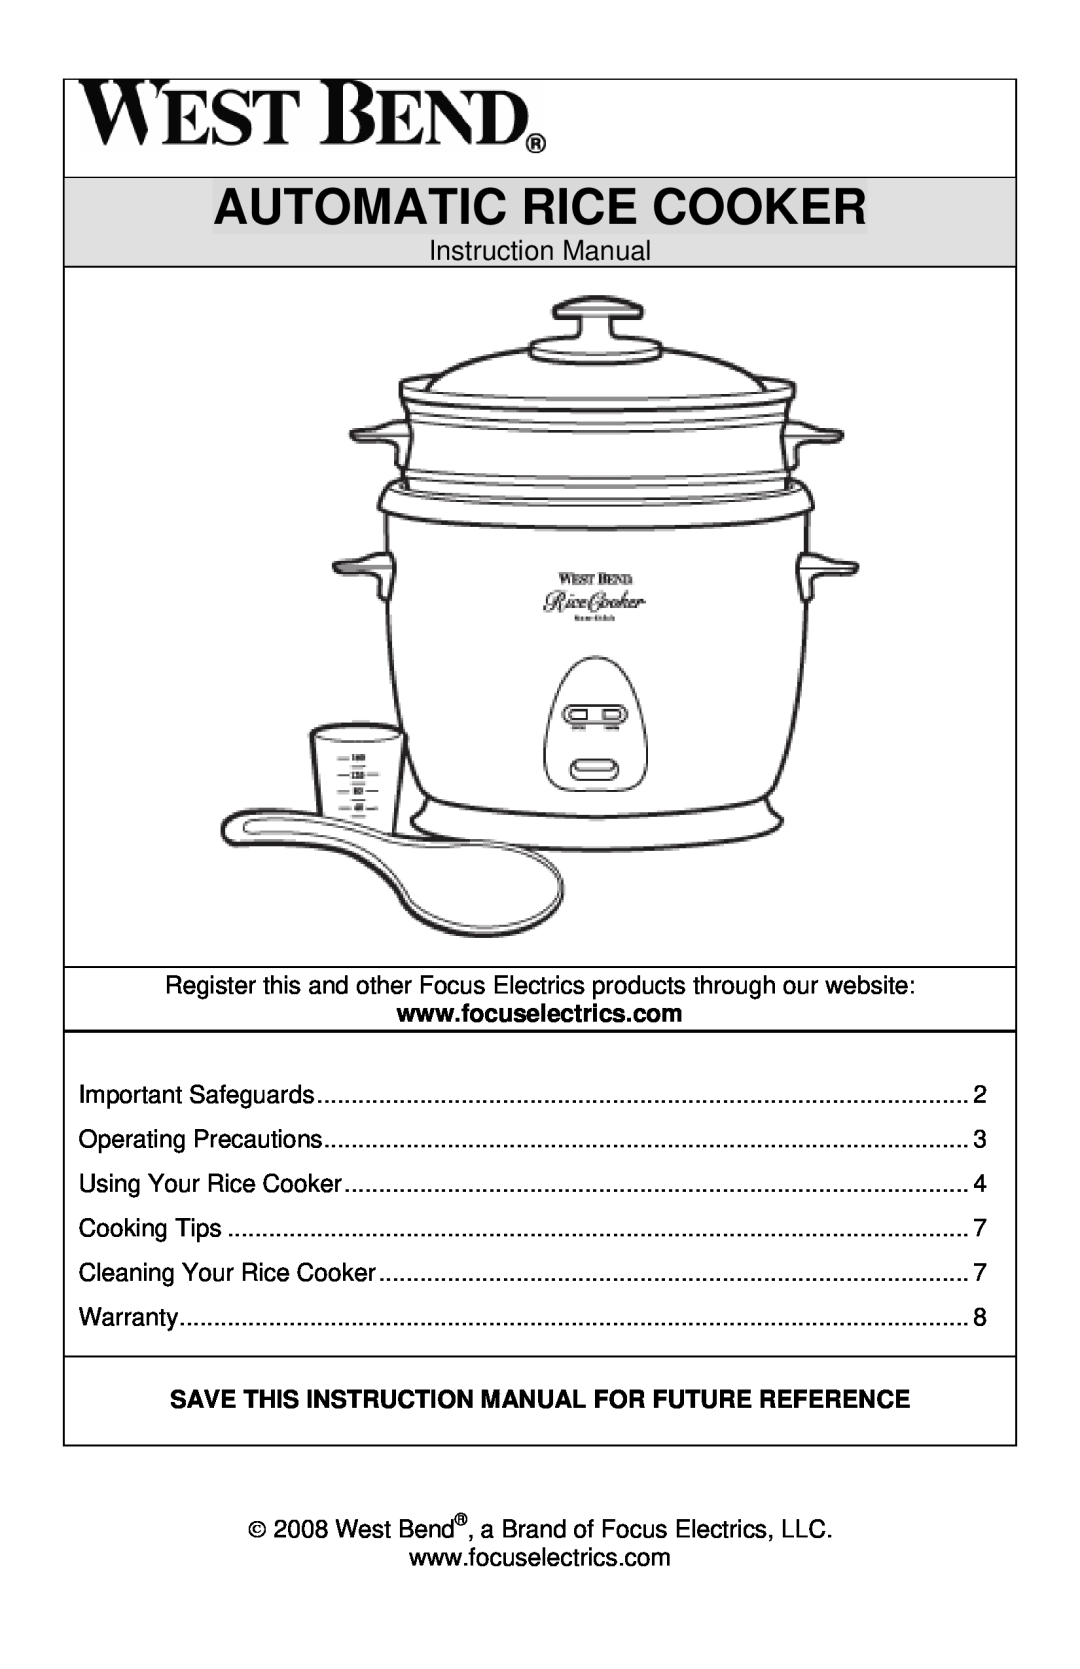 West Bend L5551E instruction manual Automatic Rice Cooker, Instruction Manual 